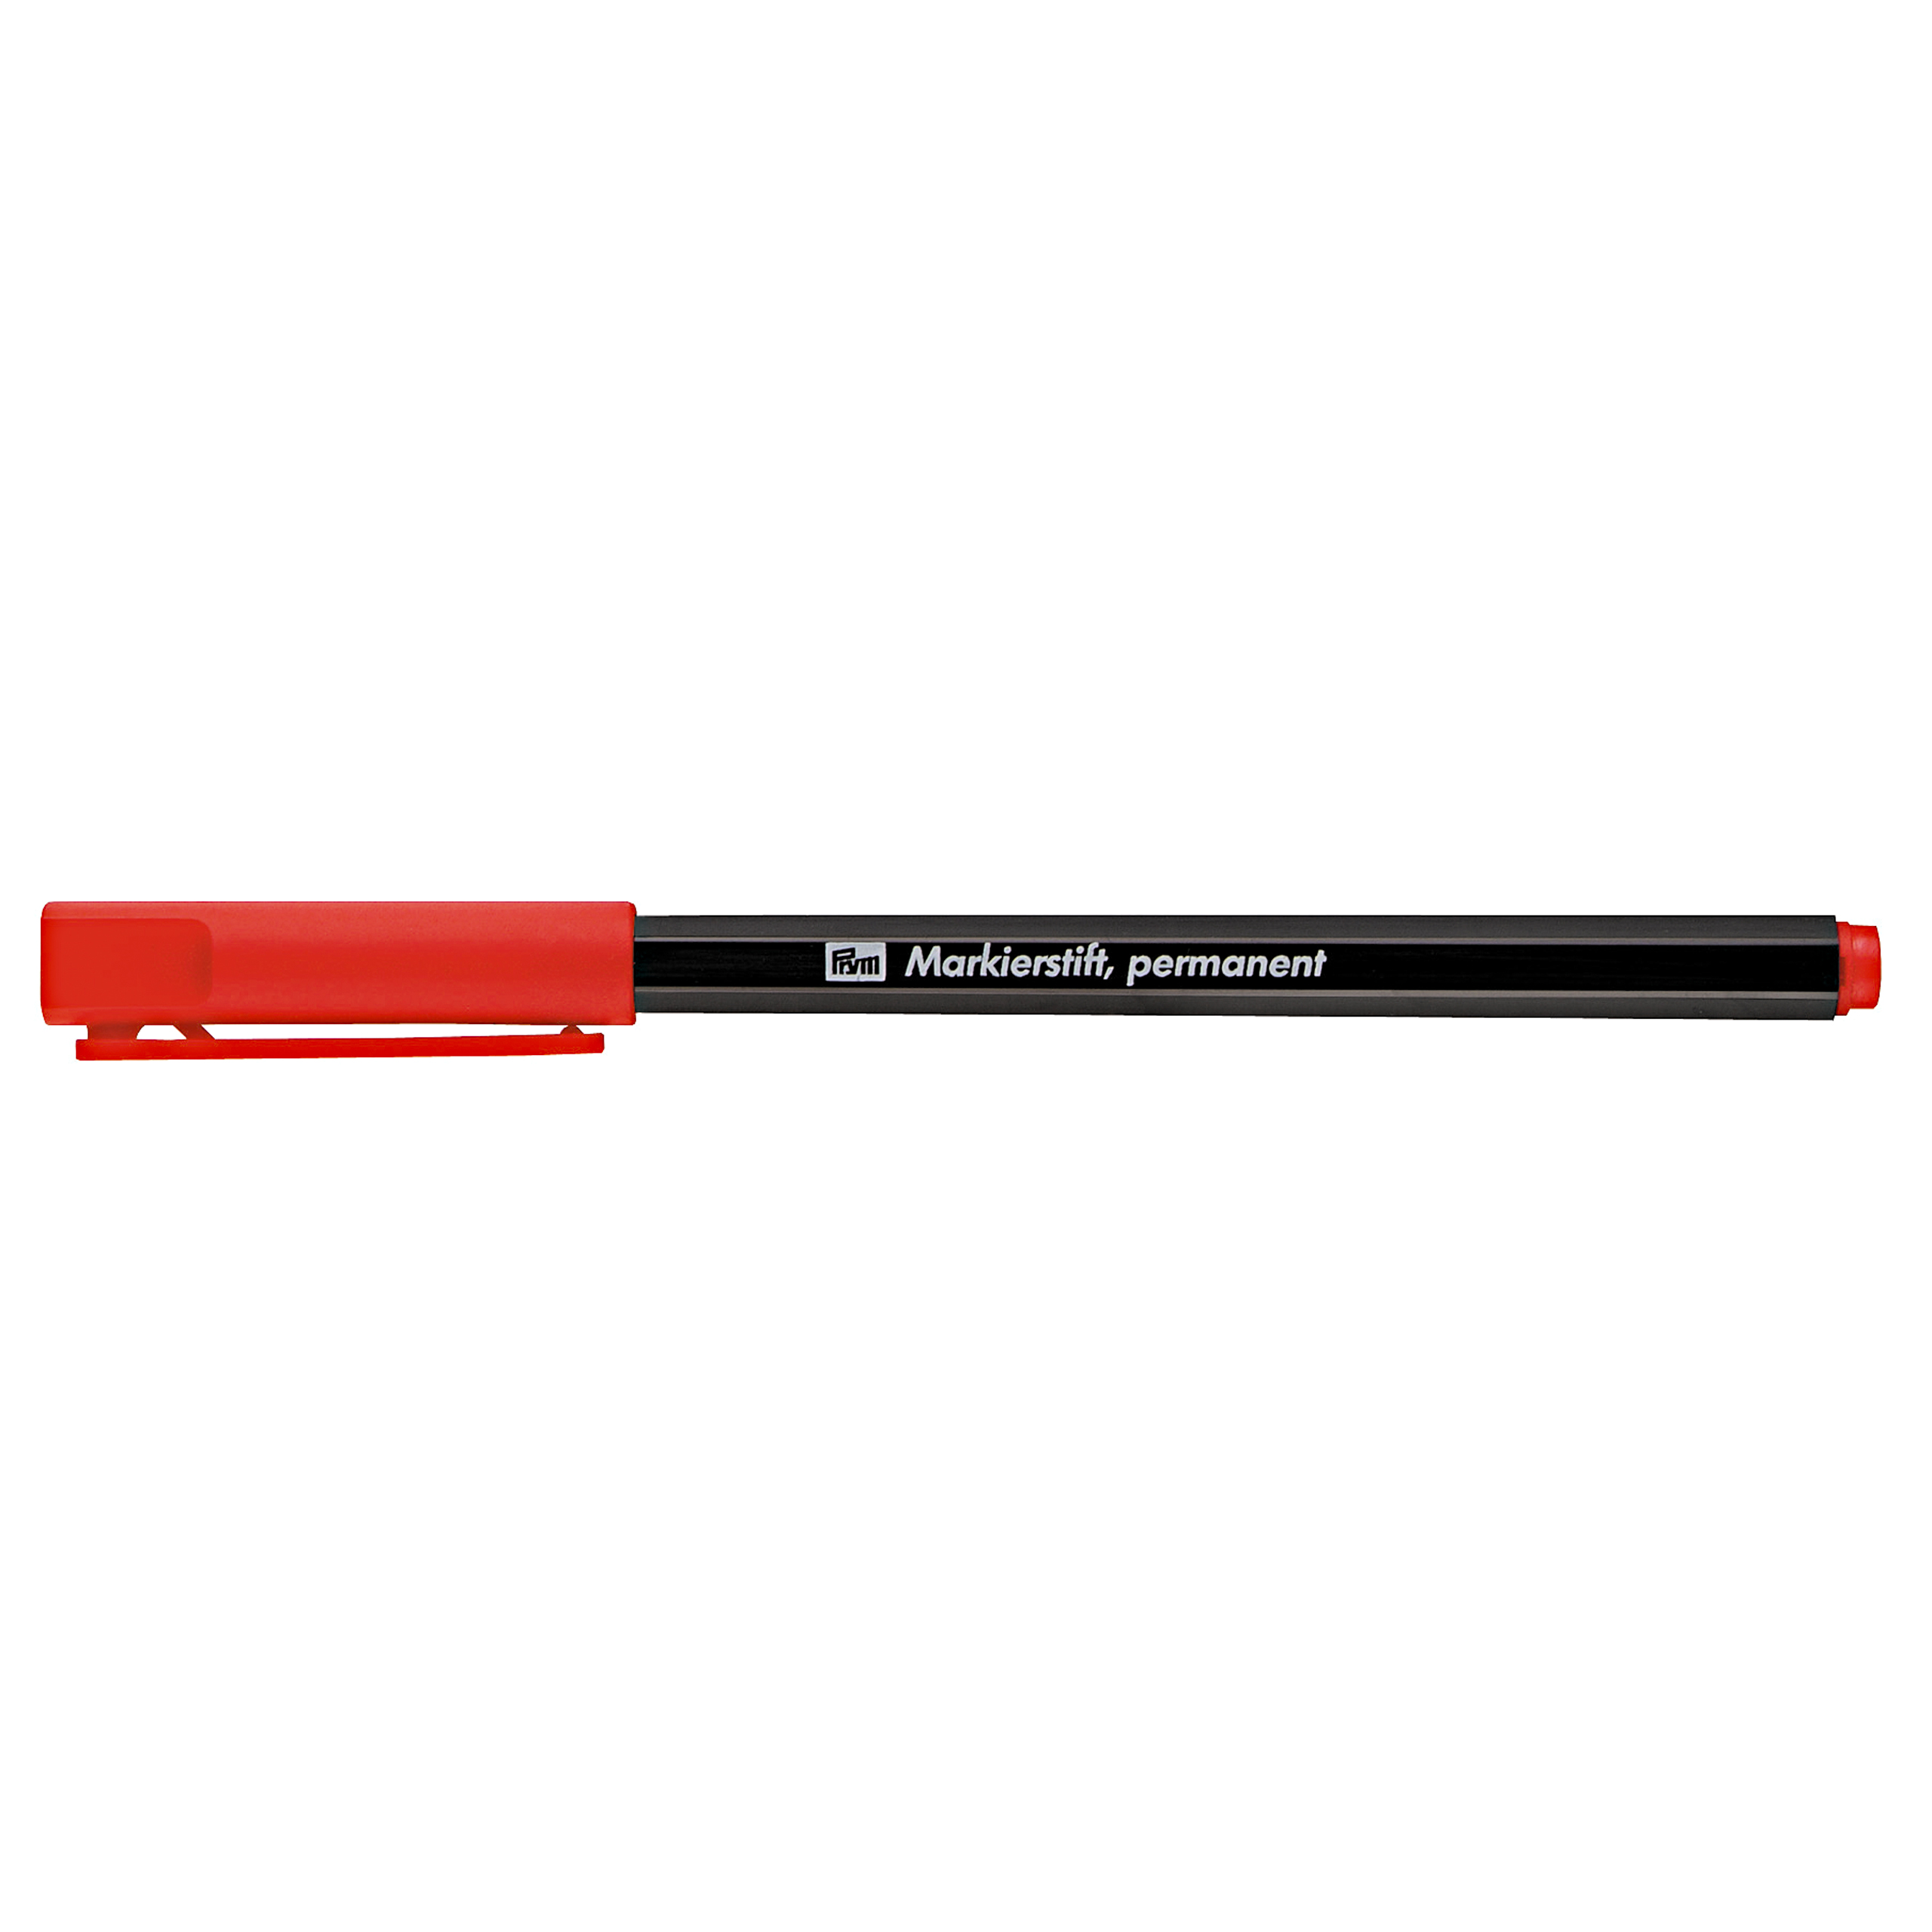 Laundry marking pen, permanent red, 1 St